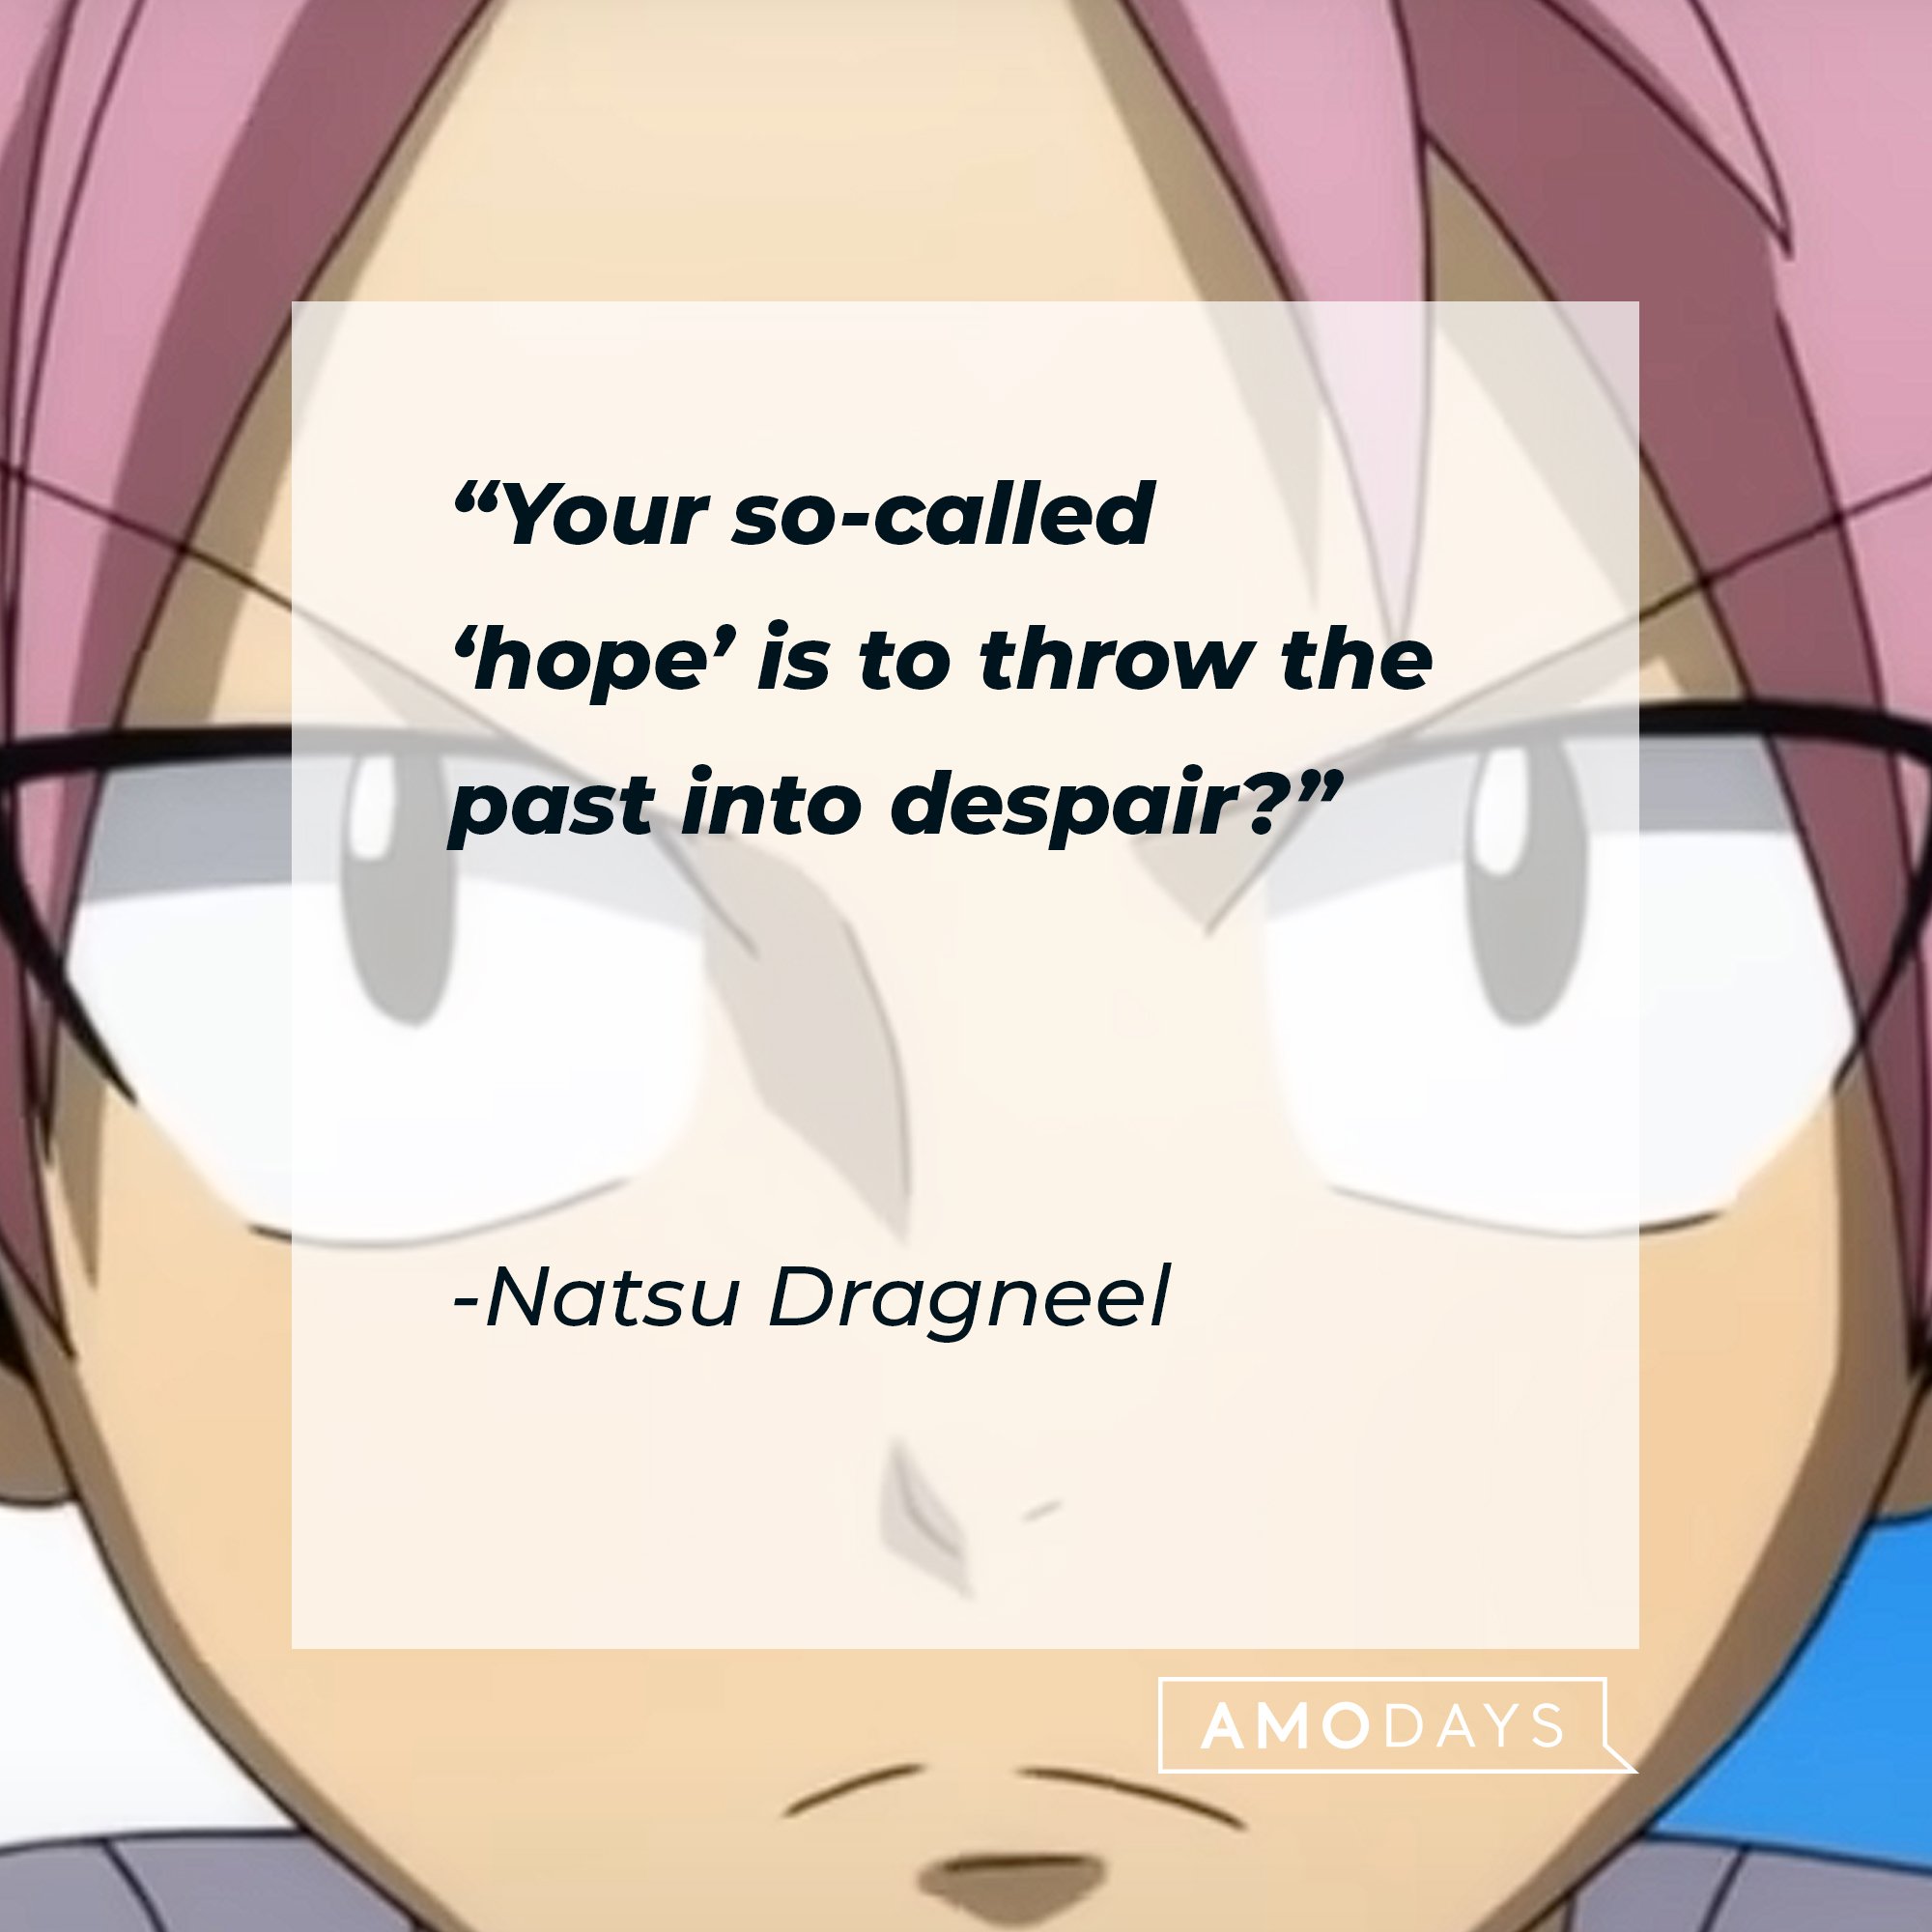 Natsu Dragneel’s quote: "Your so-called ‘hope’ is to throw the past into despair?" | Image: AmoDays